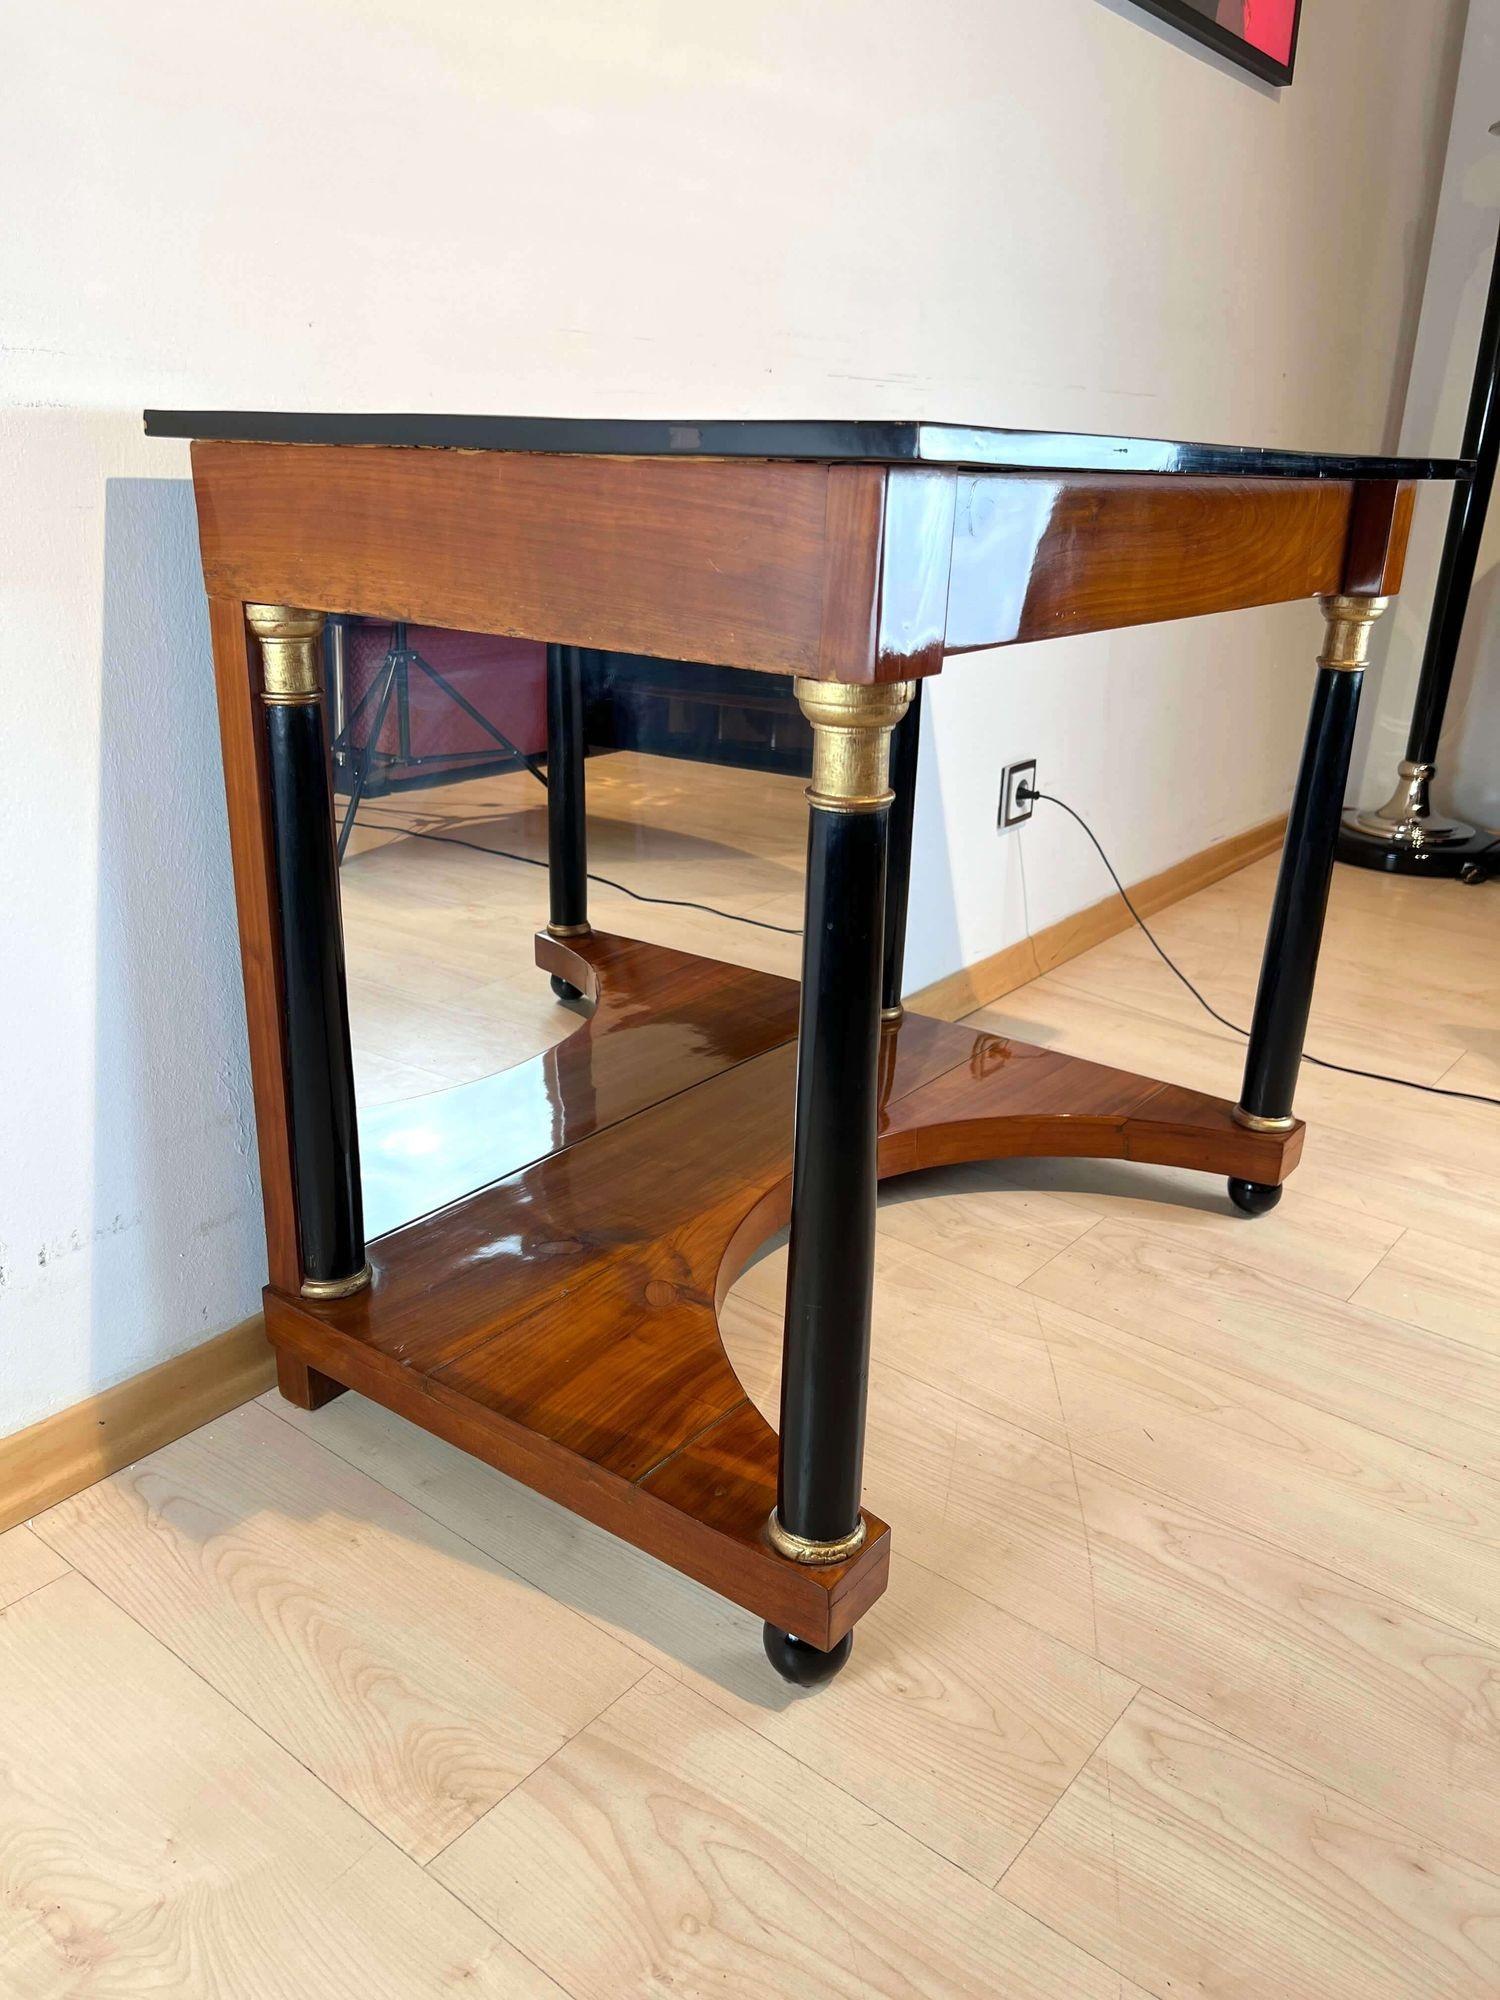 Biedermeier Console Table, Cherry Wood, Full Columns, South Germany circa 1820 In Good Condition For Sale In Regensburg, DE